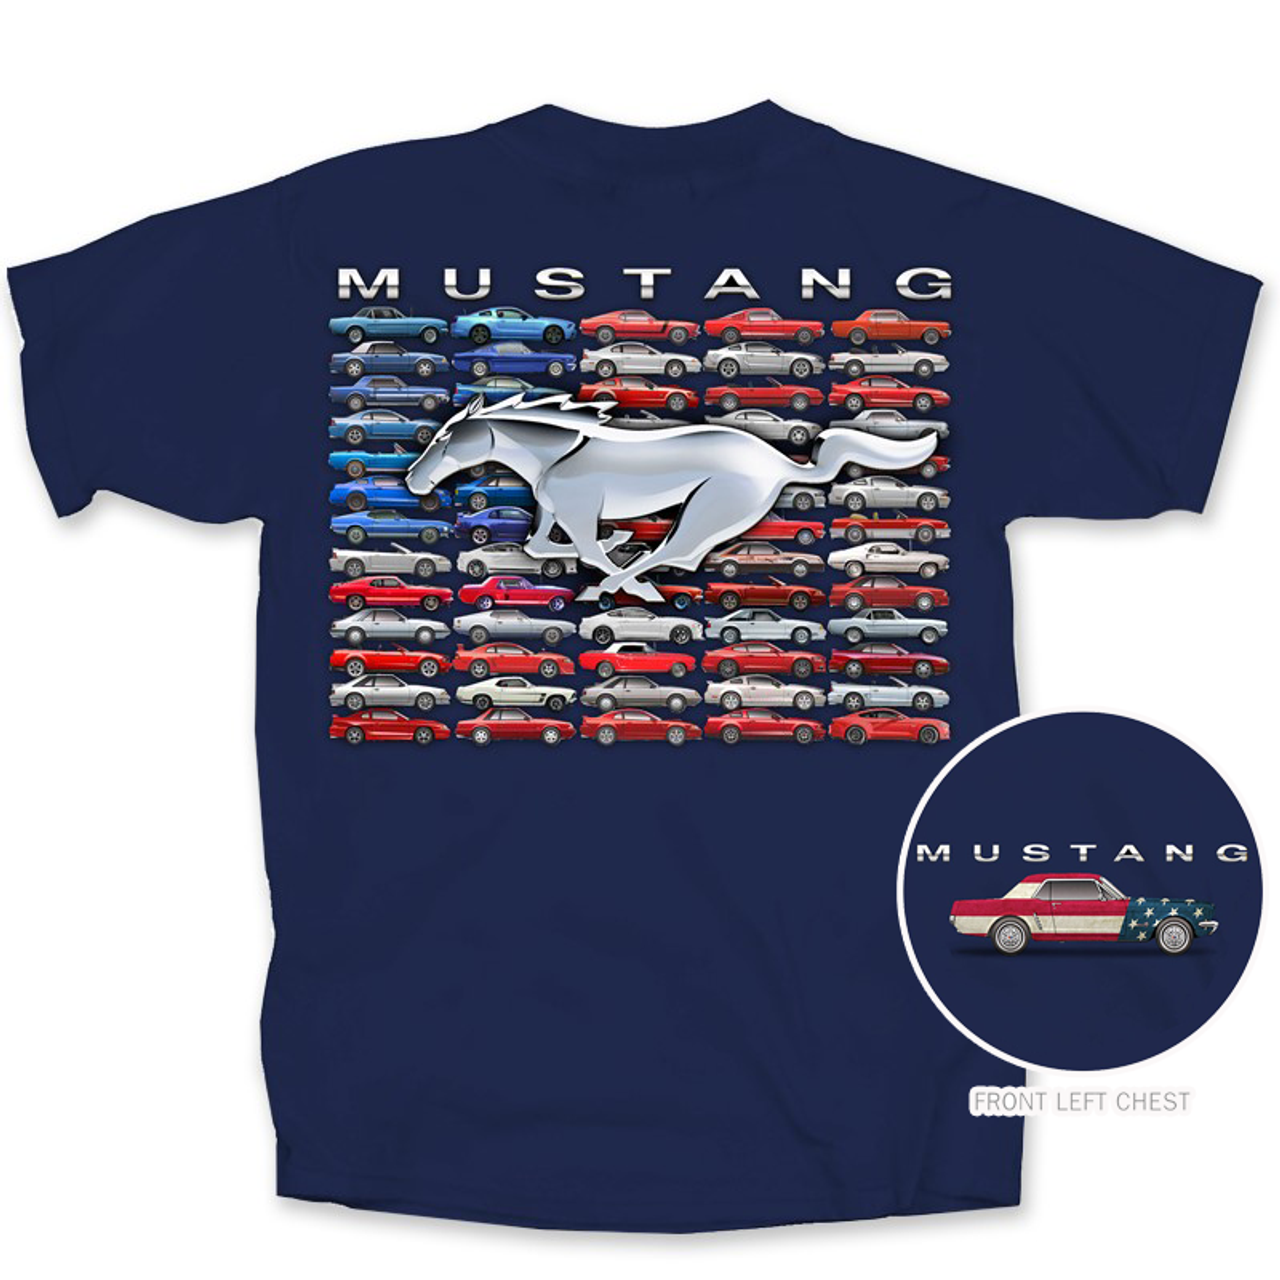 https://cdn11.bigcommerce.com/s-pl27udn9i/images/stencil/1280x1280/products/4534/15081/FMMFA_Flag_Mustang_Front_and_back__10571.1678137811.png?c=2